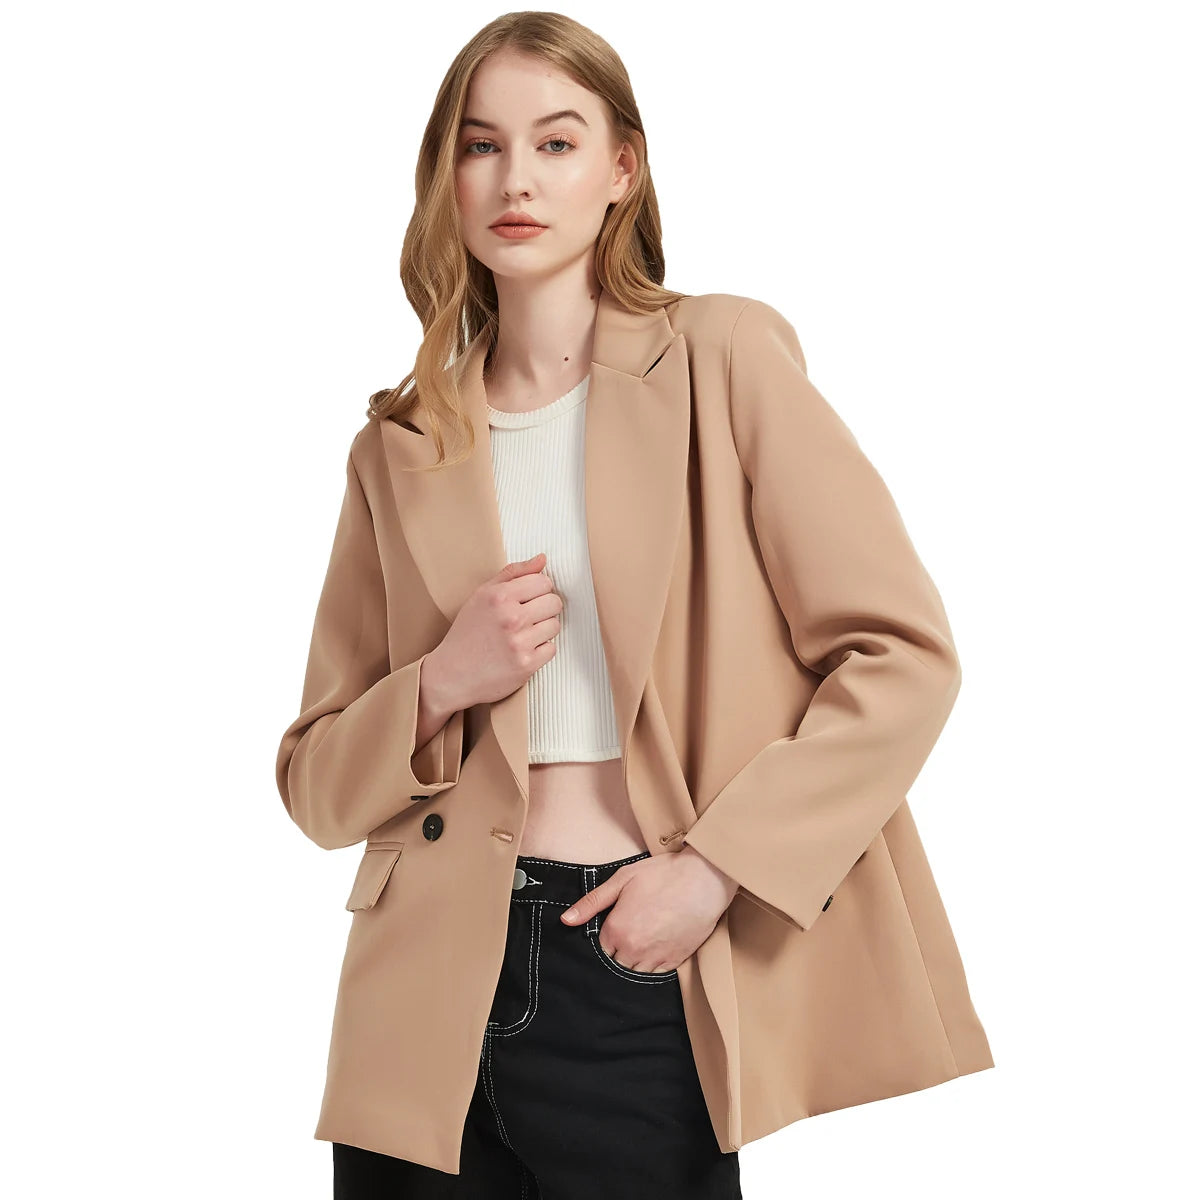 “I’m So Sly” Women’s Solid Double-Breasted Blazer